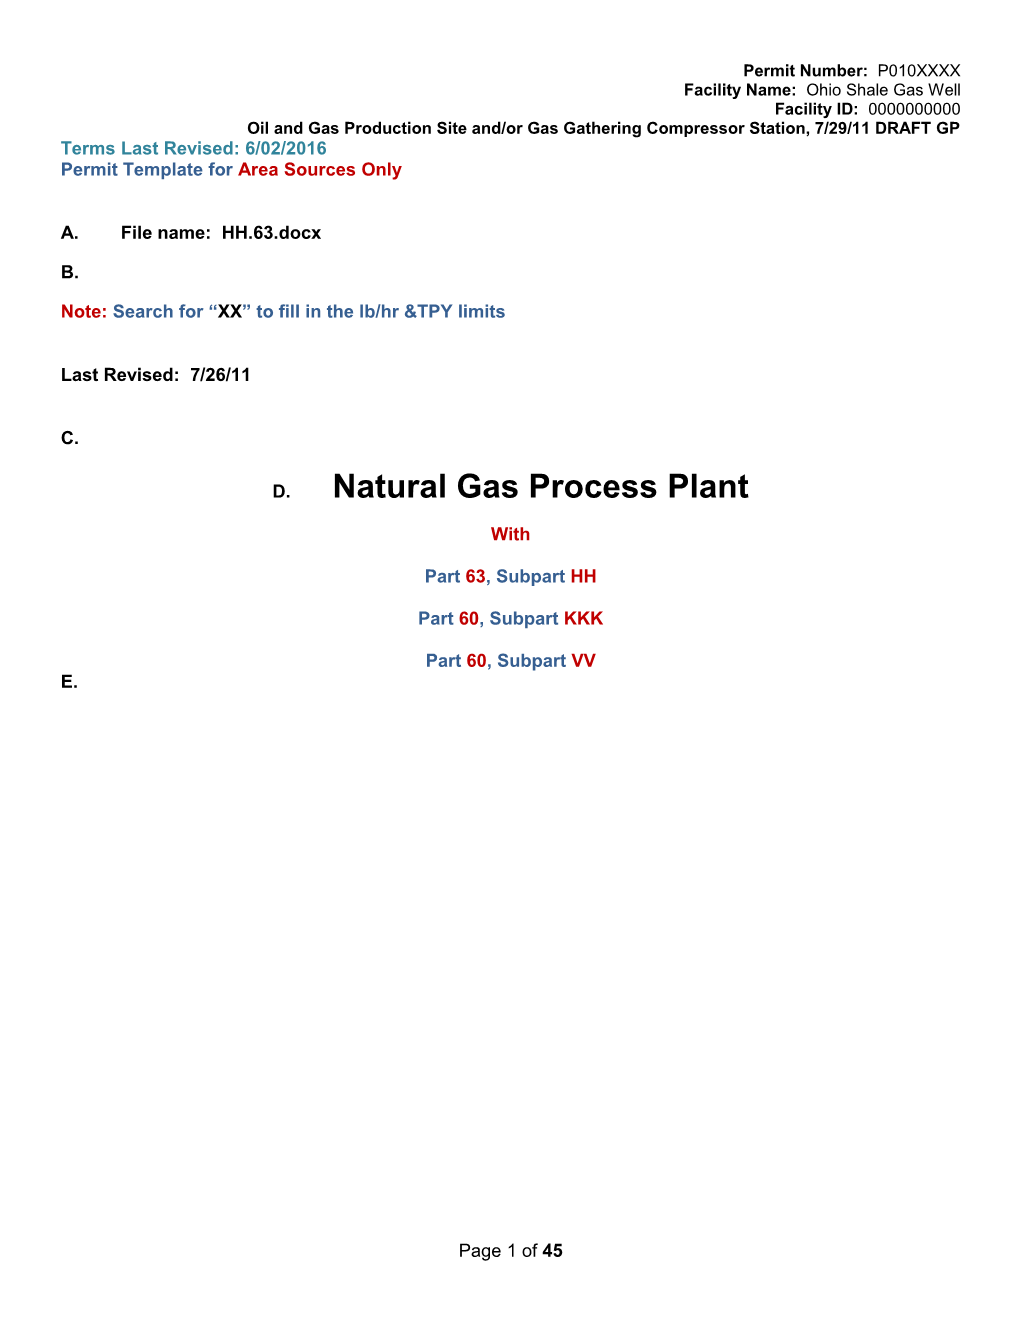 Oil and Gas Production Site And/Or Gas Gathering Compressor Station, 7/29/11 DRAFT GP